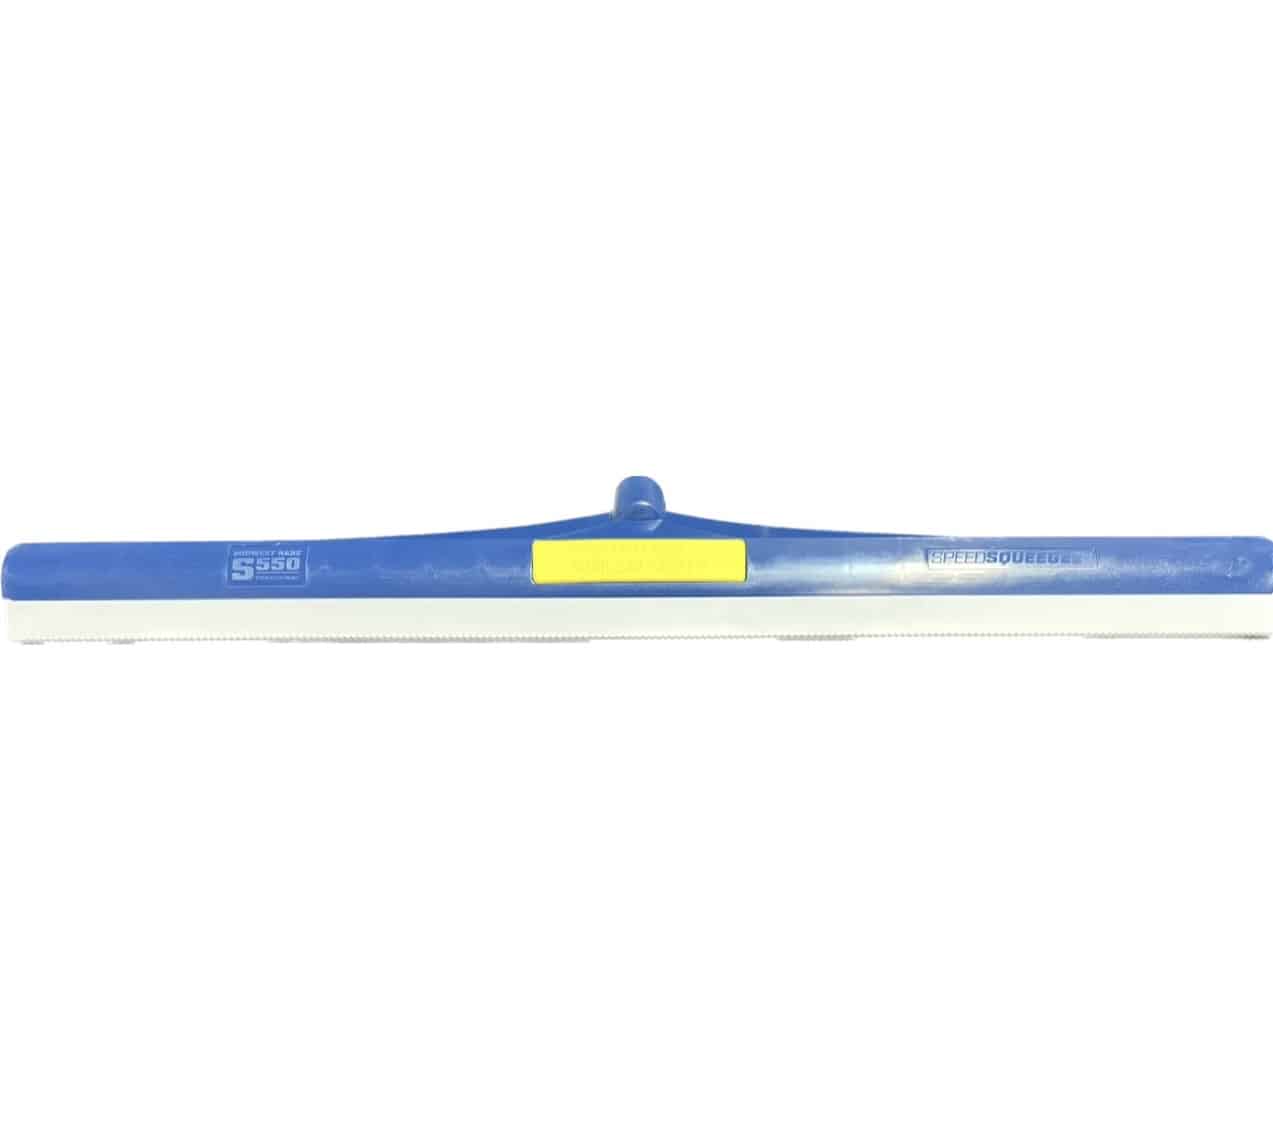 1/32" Notched Squeegee for Coatings